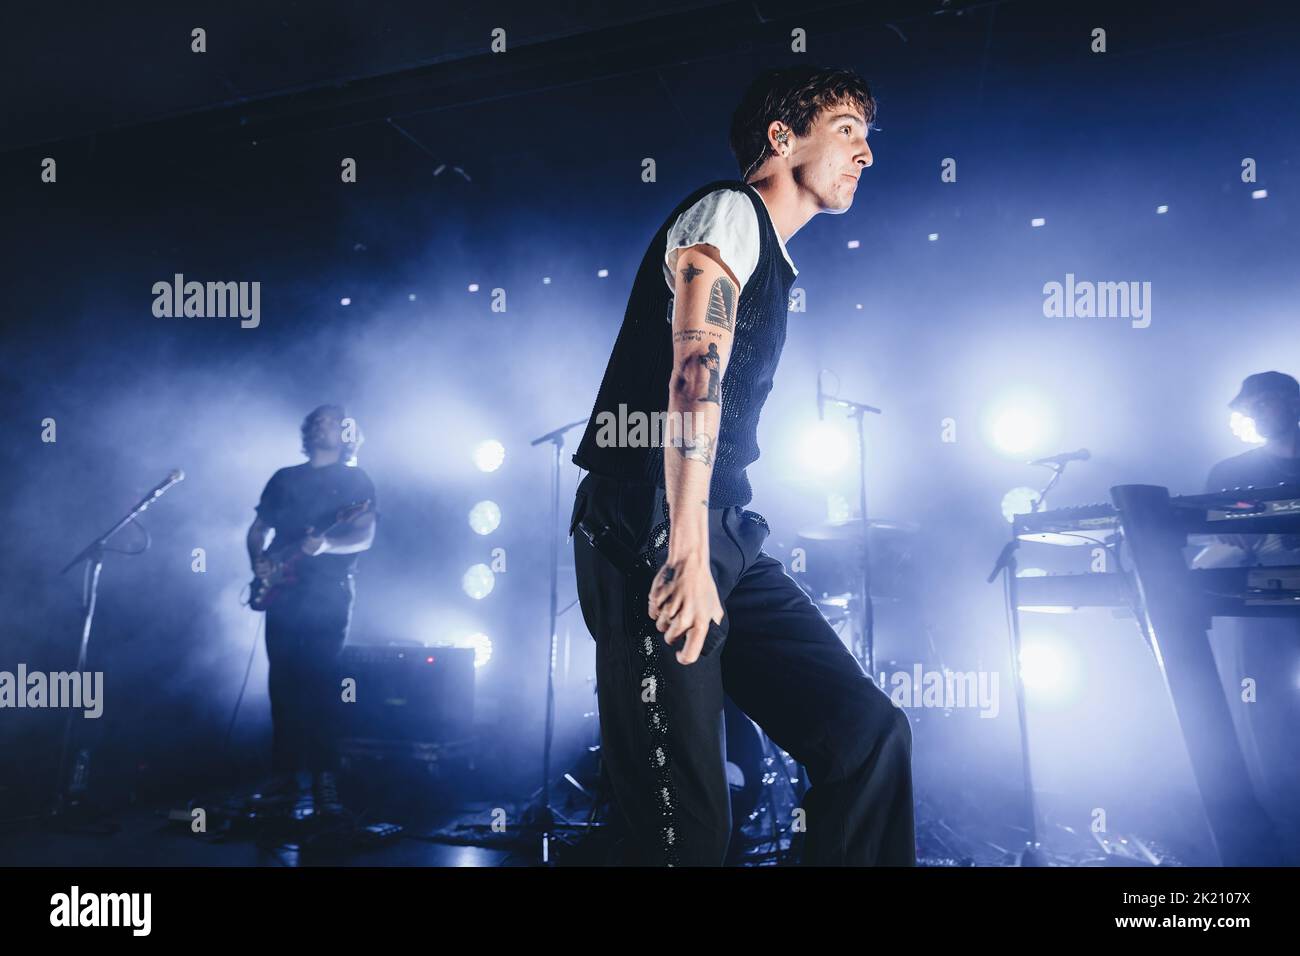 BARCELONA - SEP 10: Role Model (band from the singer Tucker Pillsbury) perform on stage at Apolo 2 on September 10, 2022 in Barcelona, Spain. Stock Photo